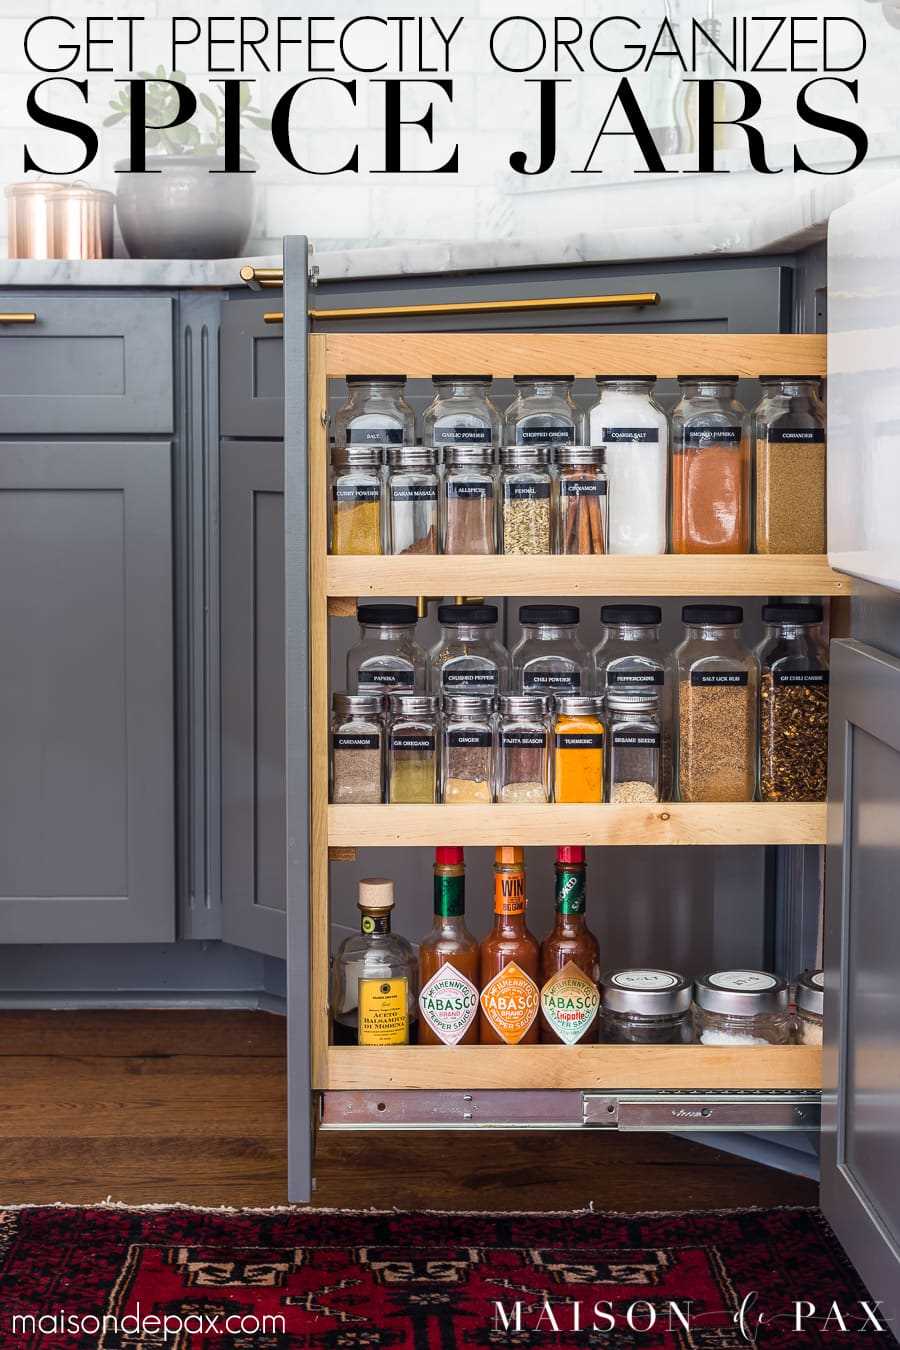 Organize Your Spice Drawer with a Spice Drawer Organizer - The Ultimate Solution